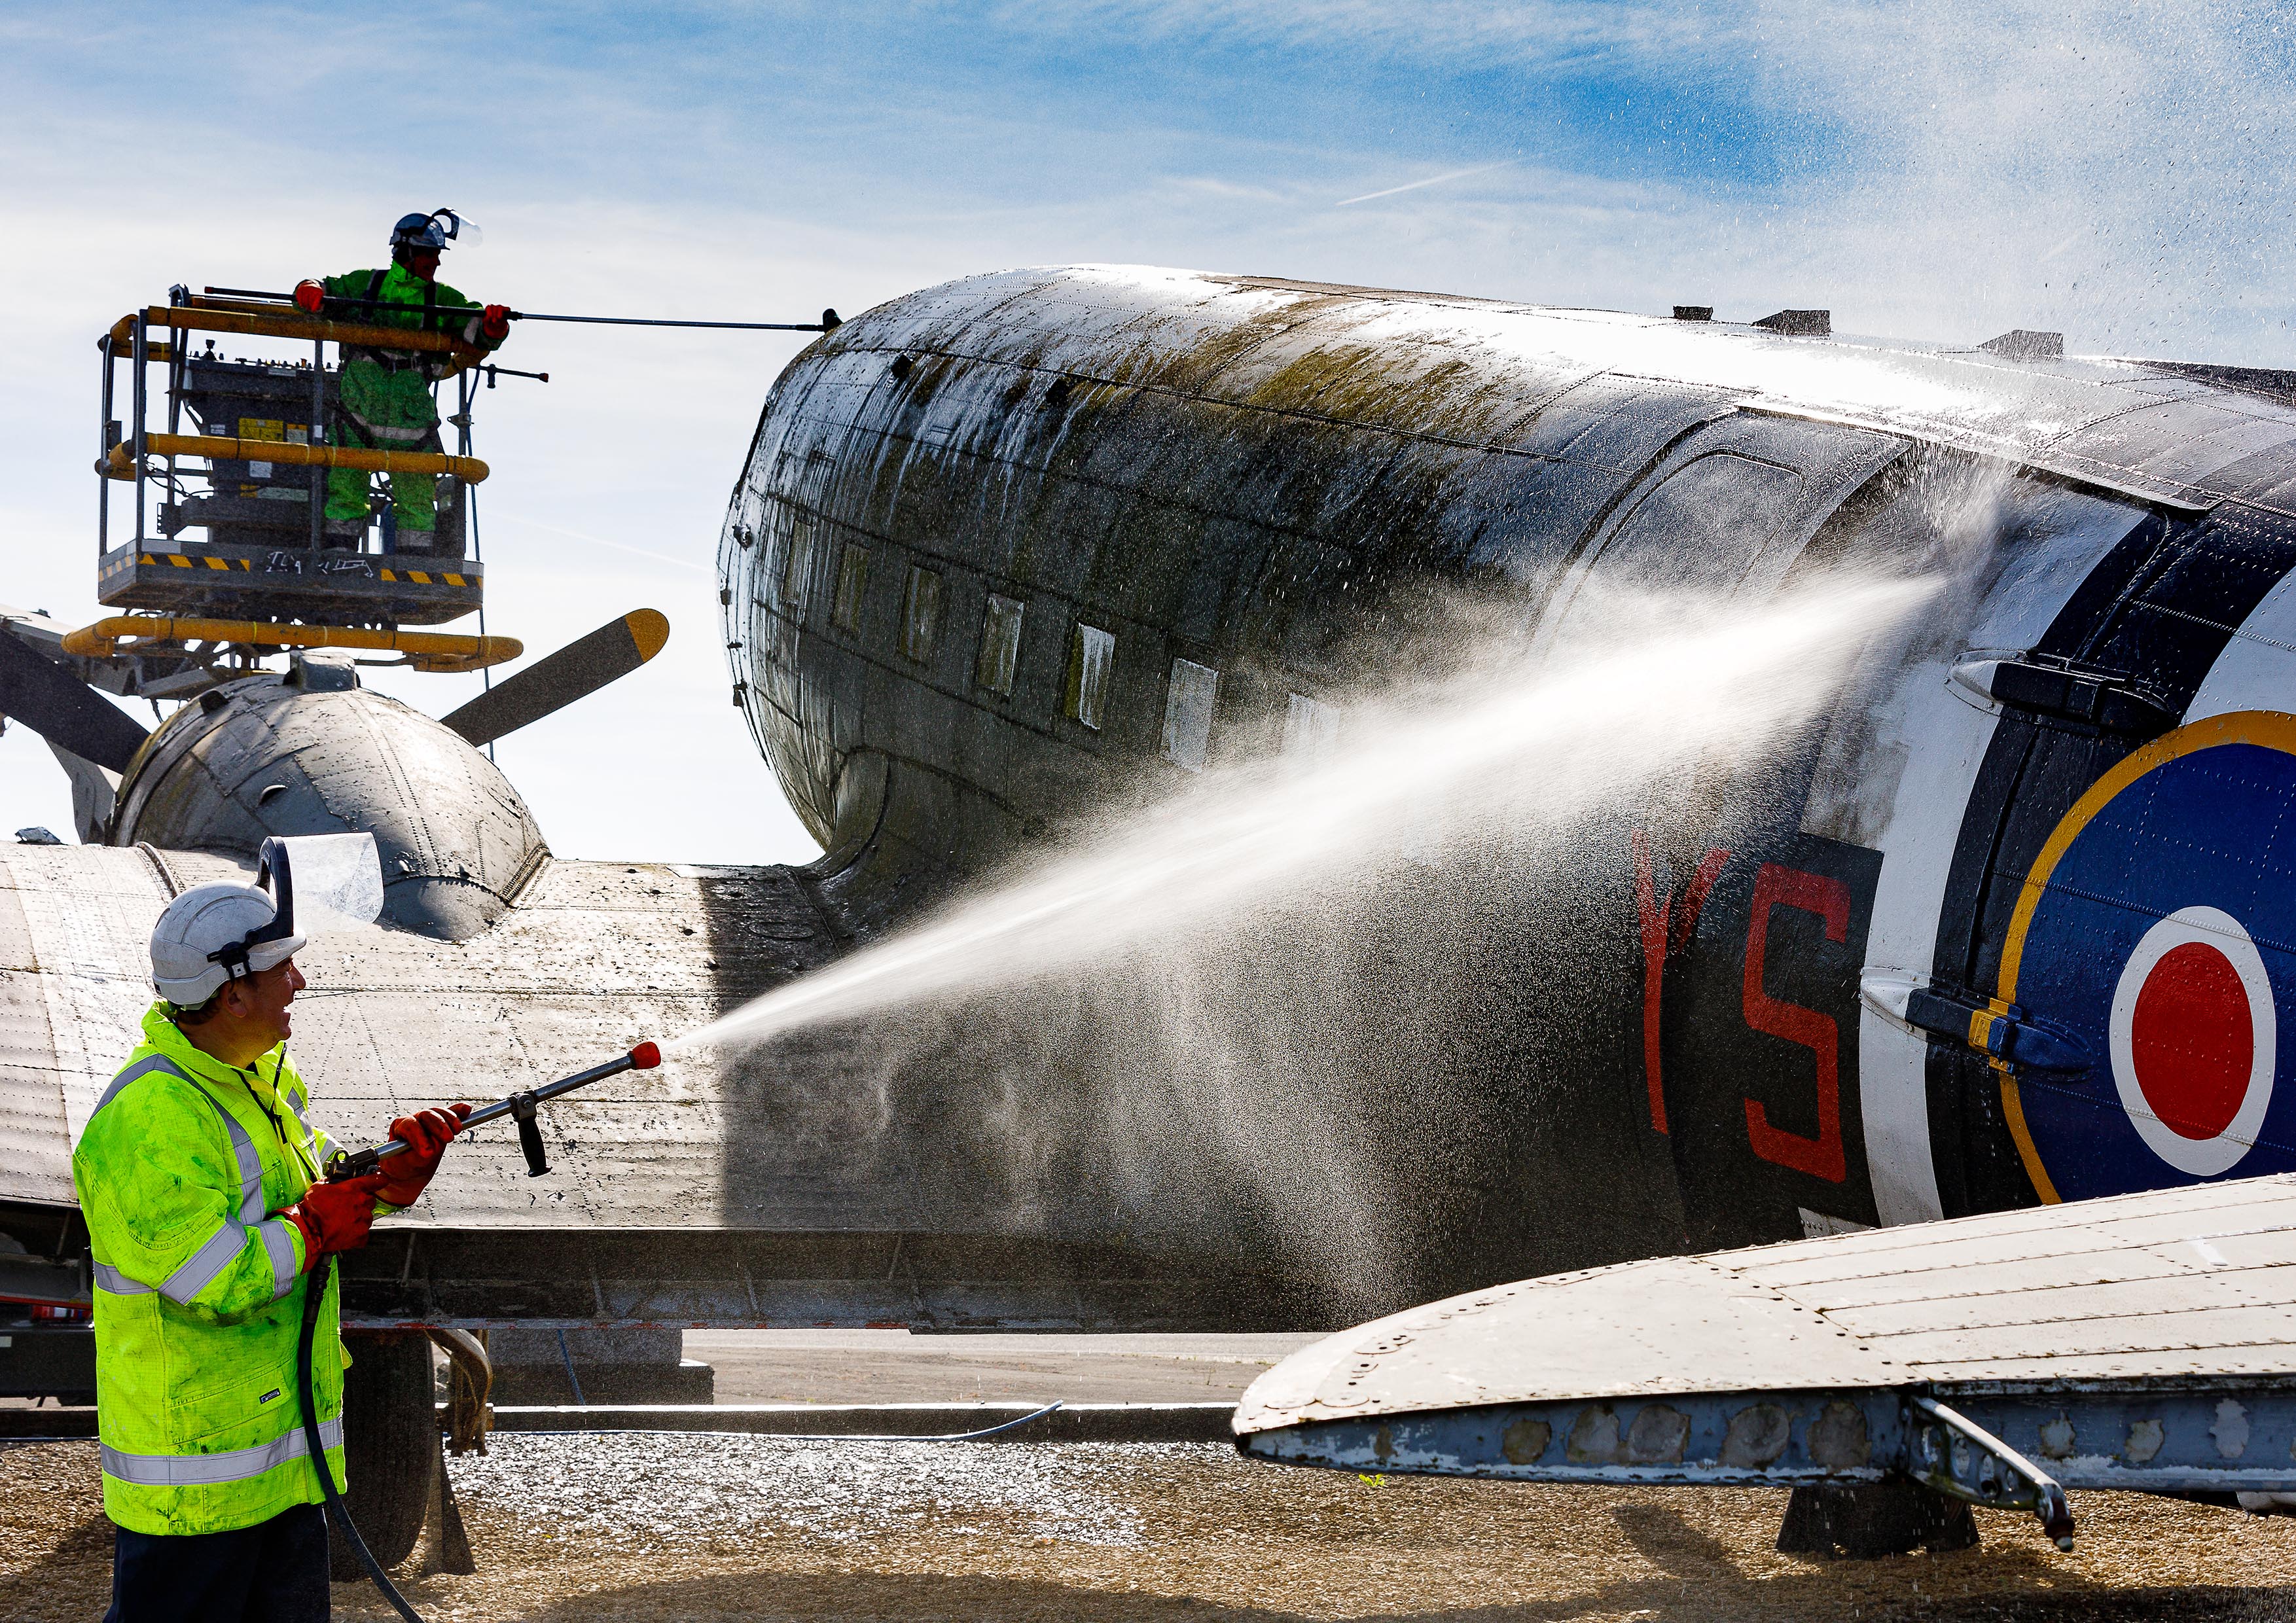 Photo: Members of the Serco Aircraft Wash Team pressure washing the area of the cargo door and brushing organic debris off the area of the flight deck